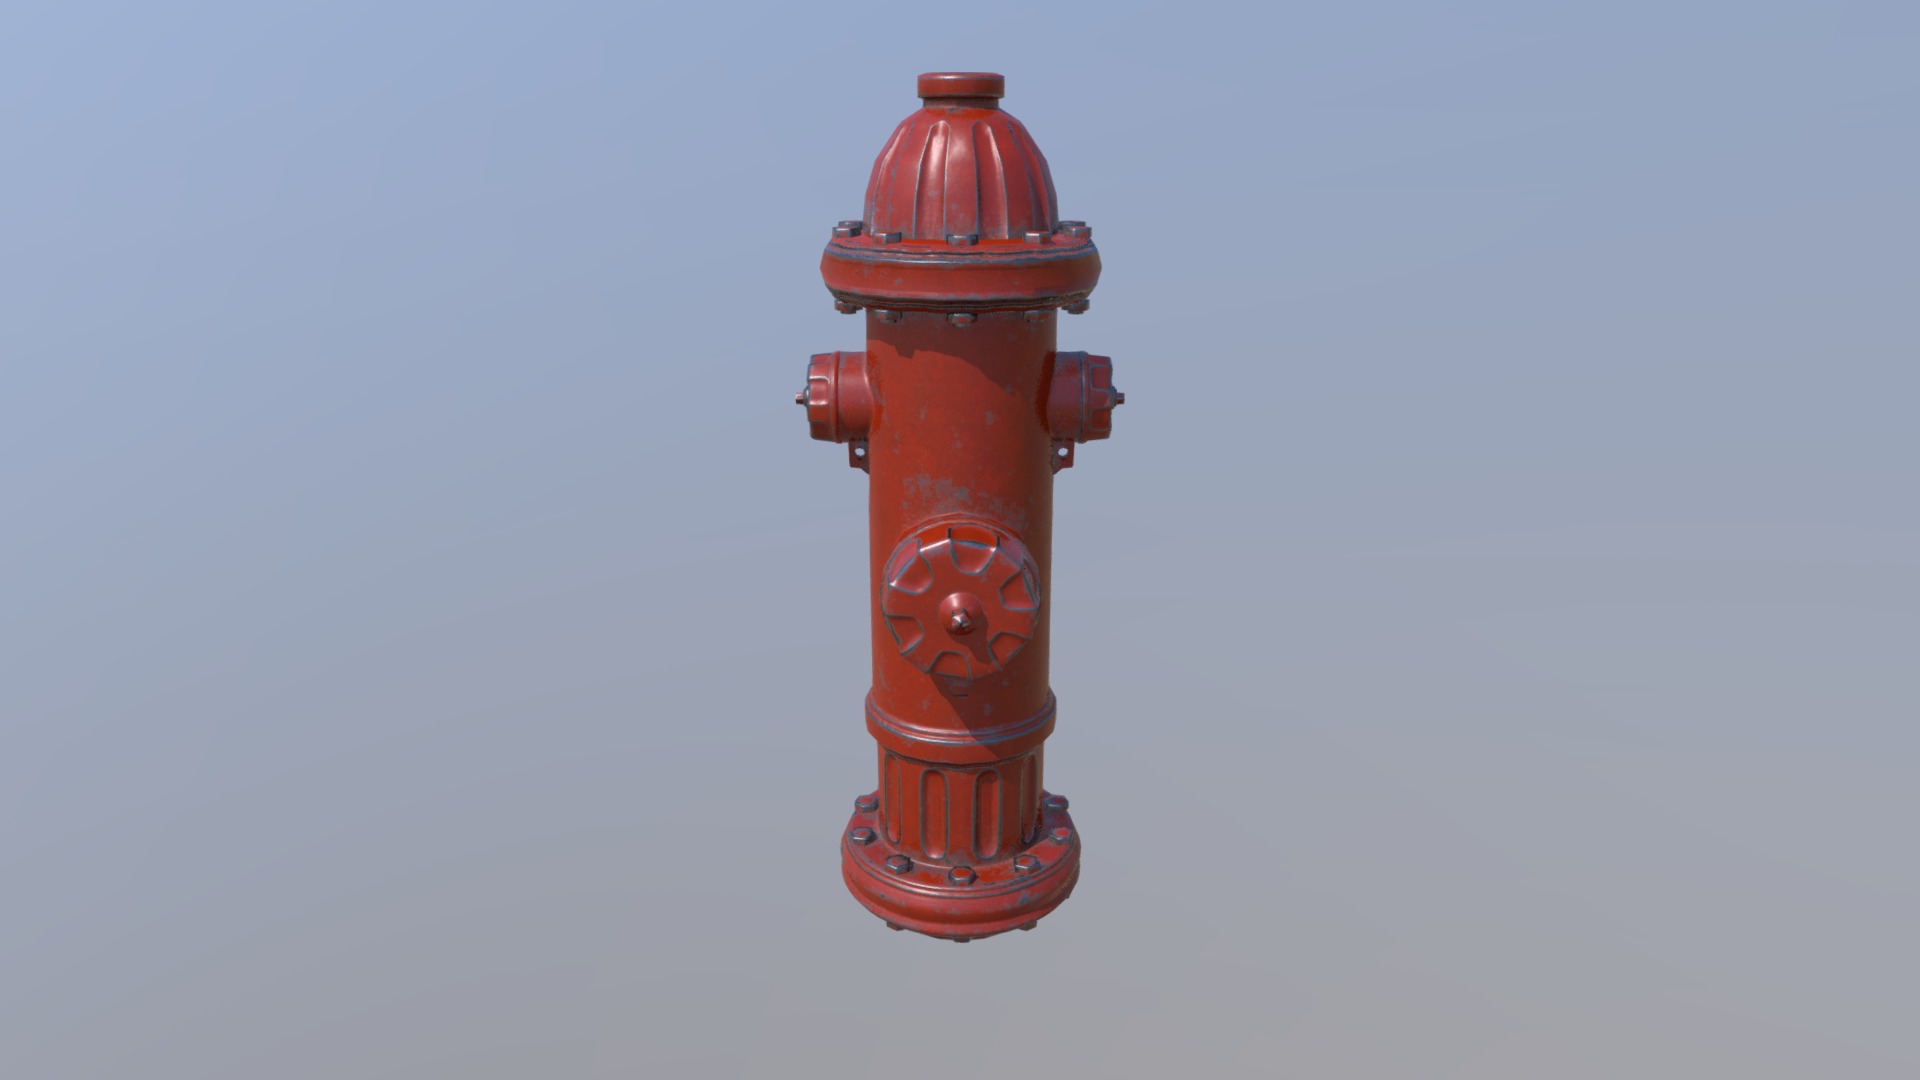 3D model The fire hydrant you’ve dreaming about - This is a 3D model of the The fire hydrant you've dreaming about. The 3D model is about a fire hydrant with a red top.